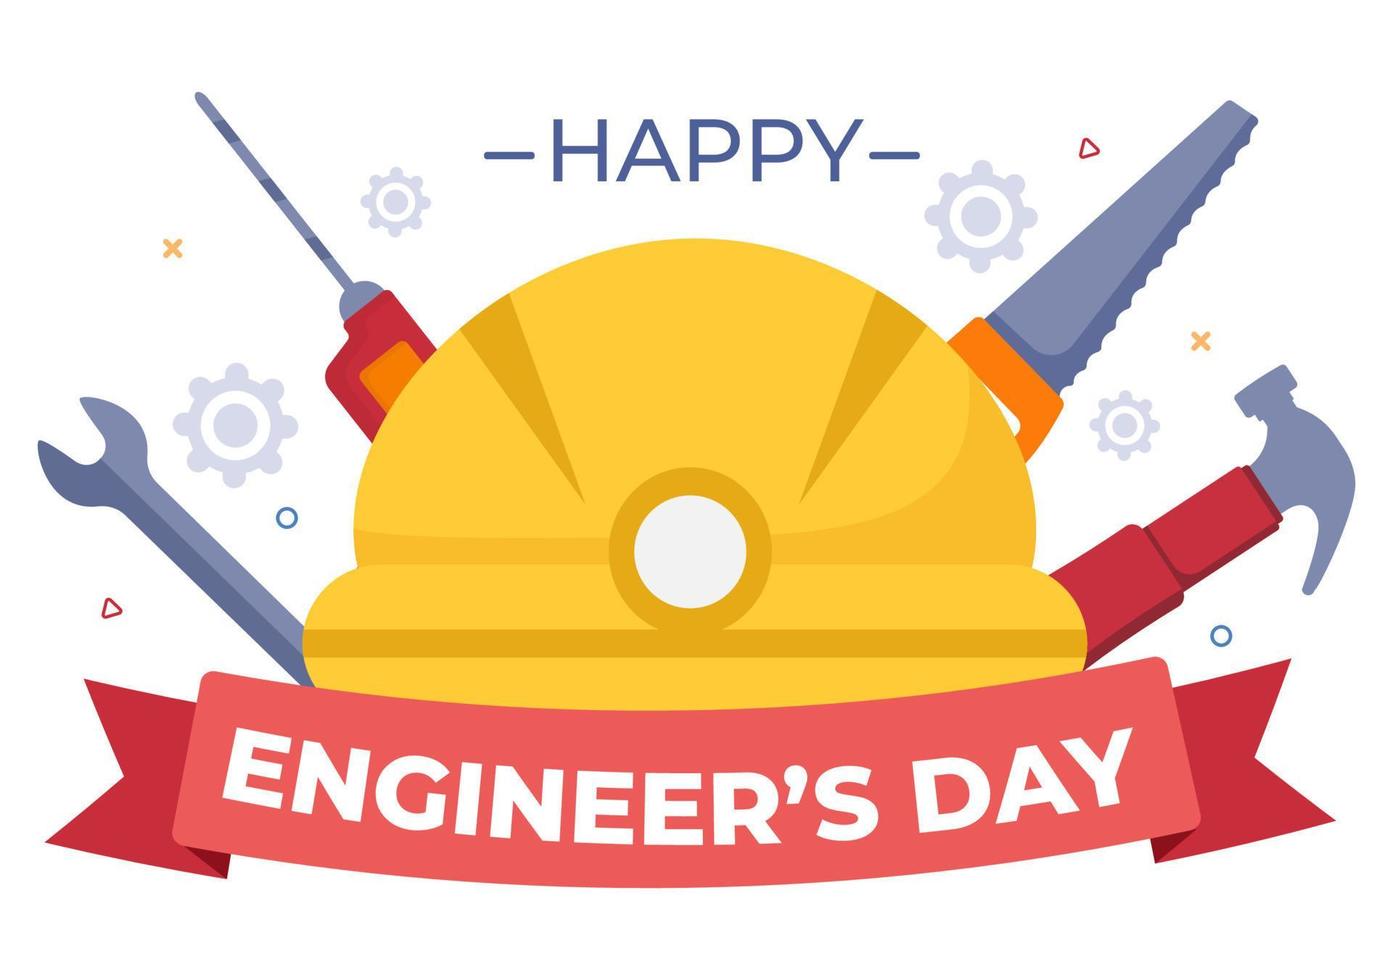 Happy Engineers Day Illustration Commemorative for Engineer vector